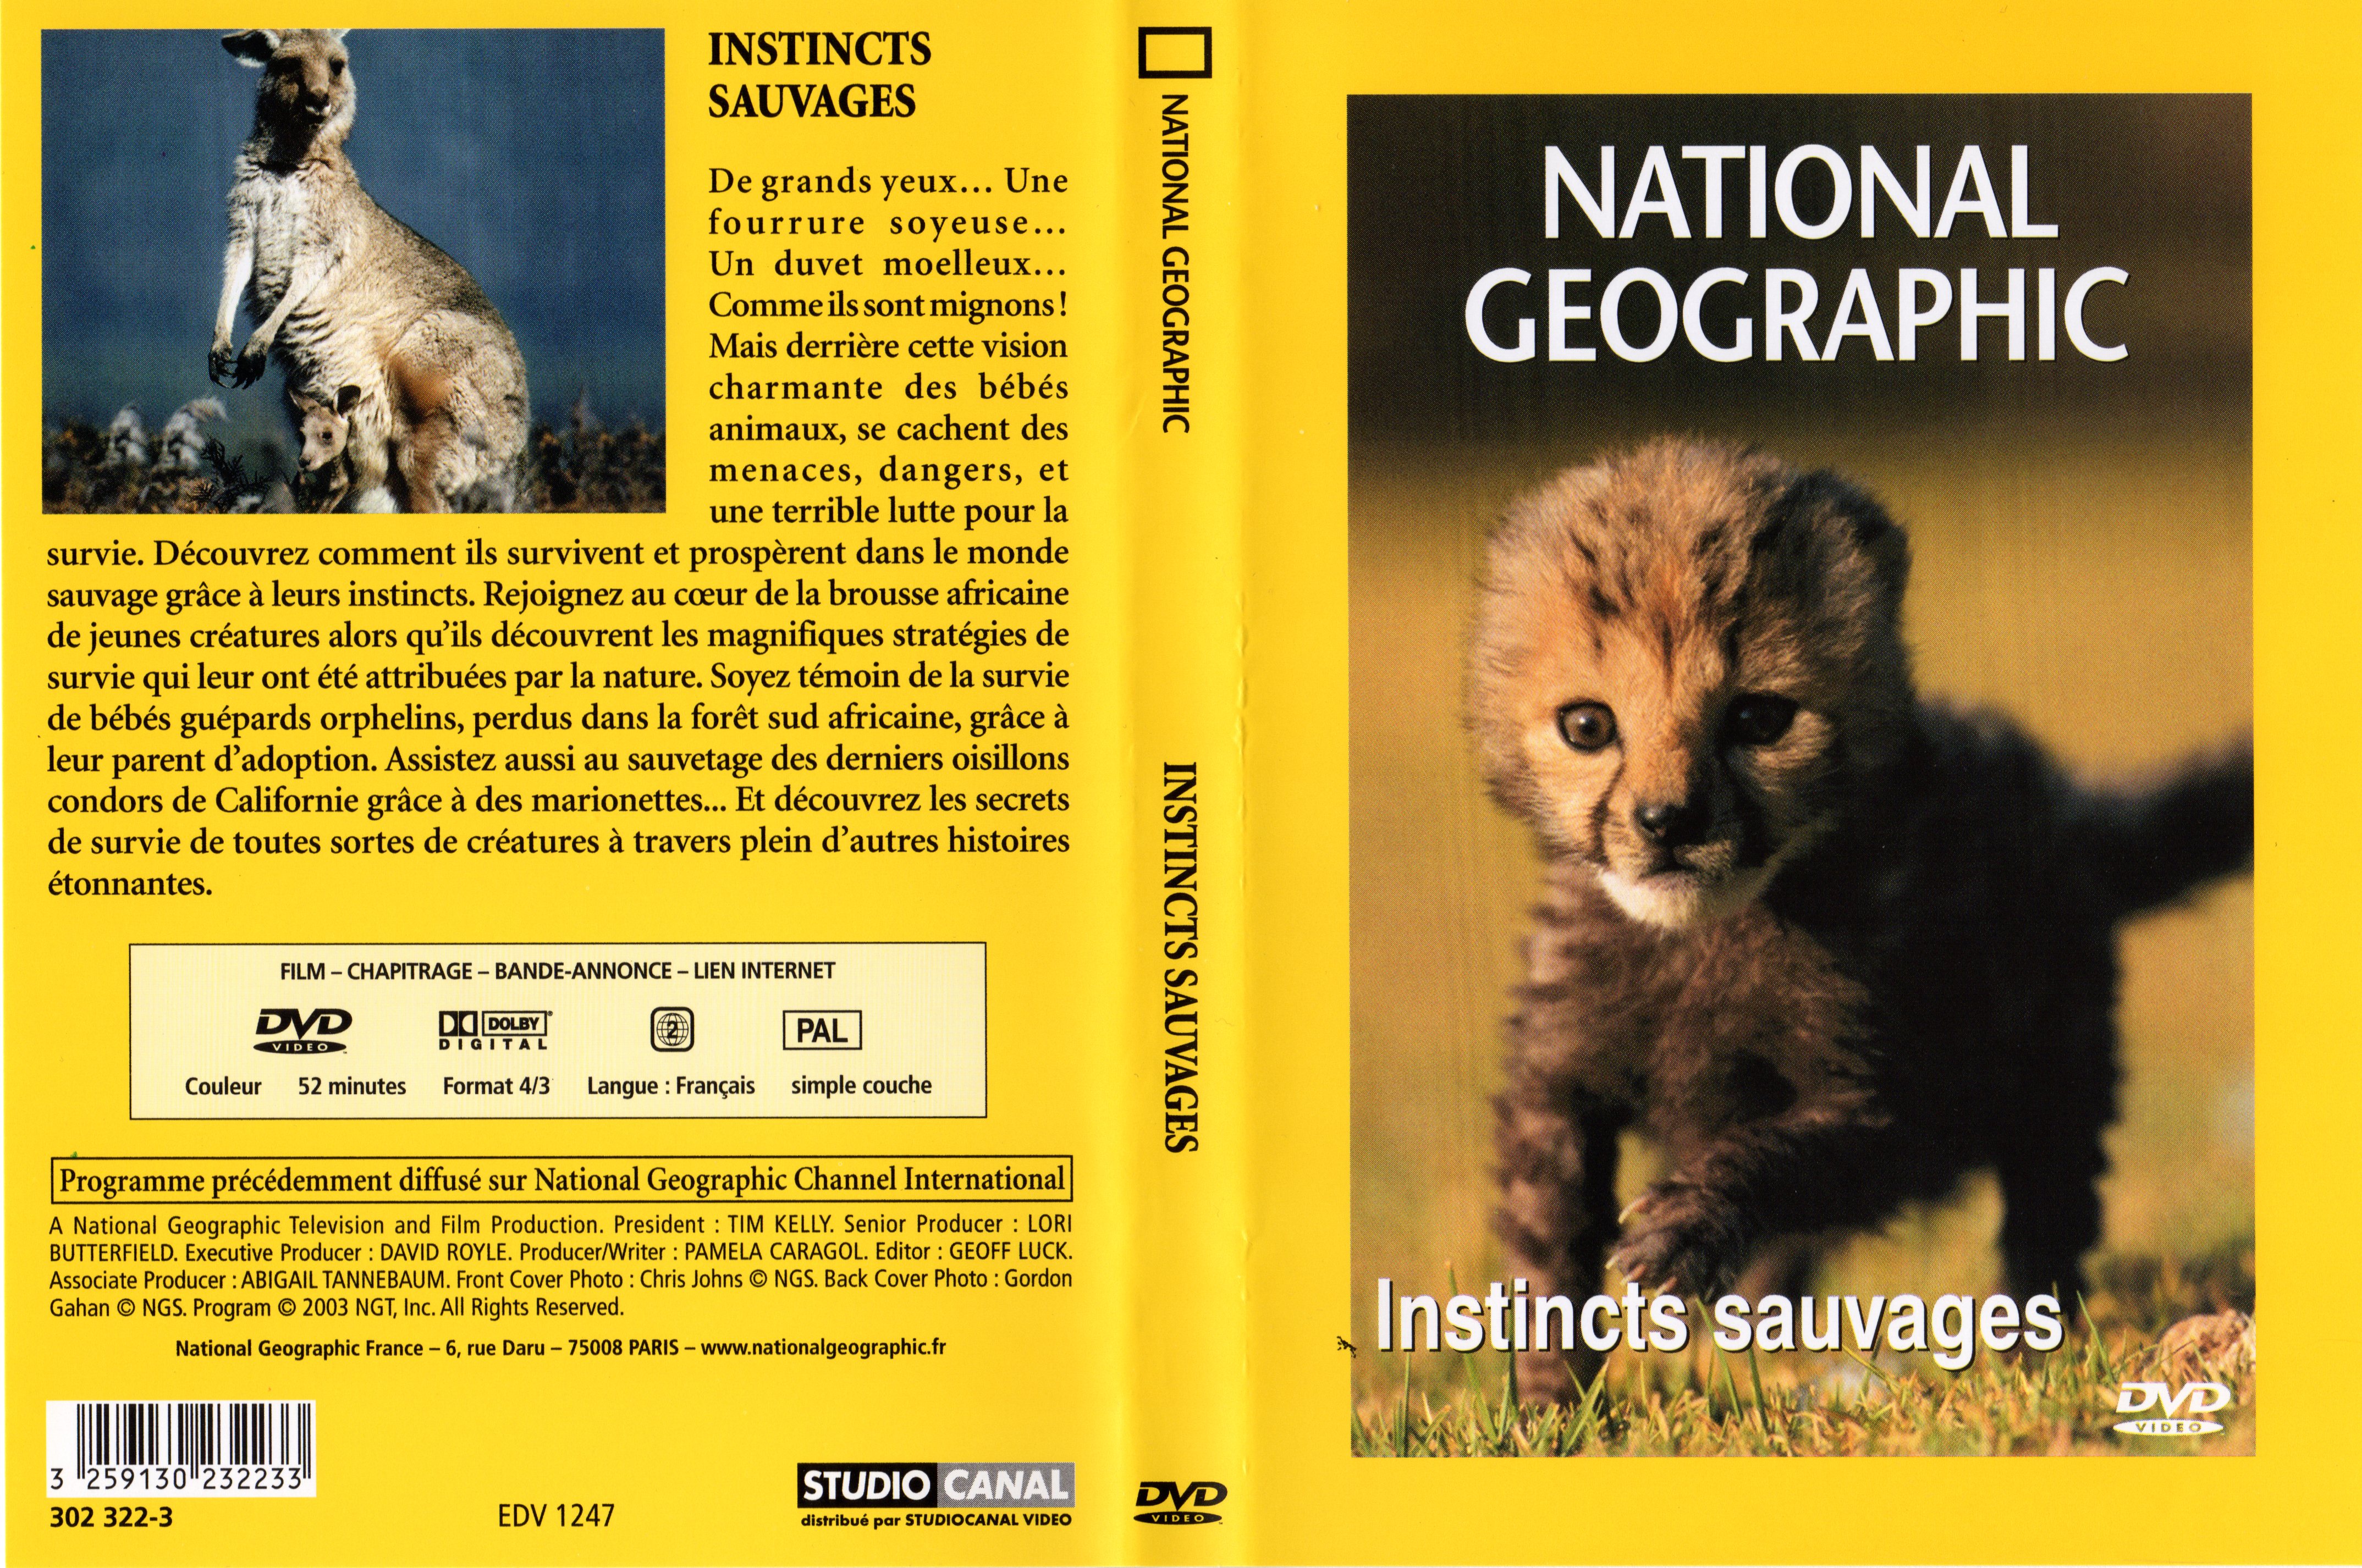 Jaquette DVD National Geographic - Instincts sauvages